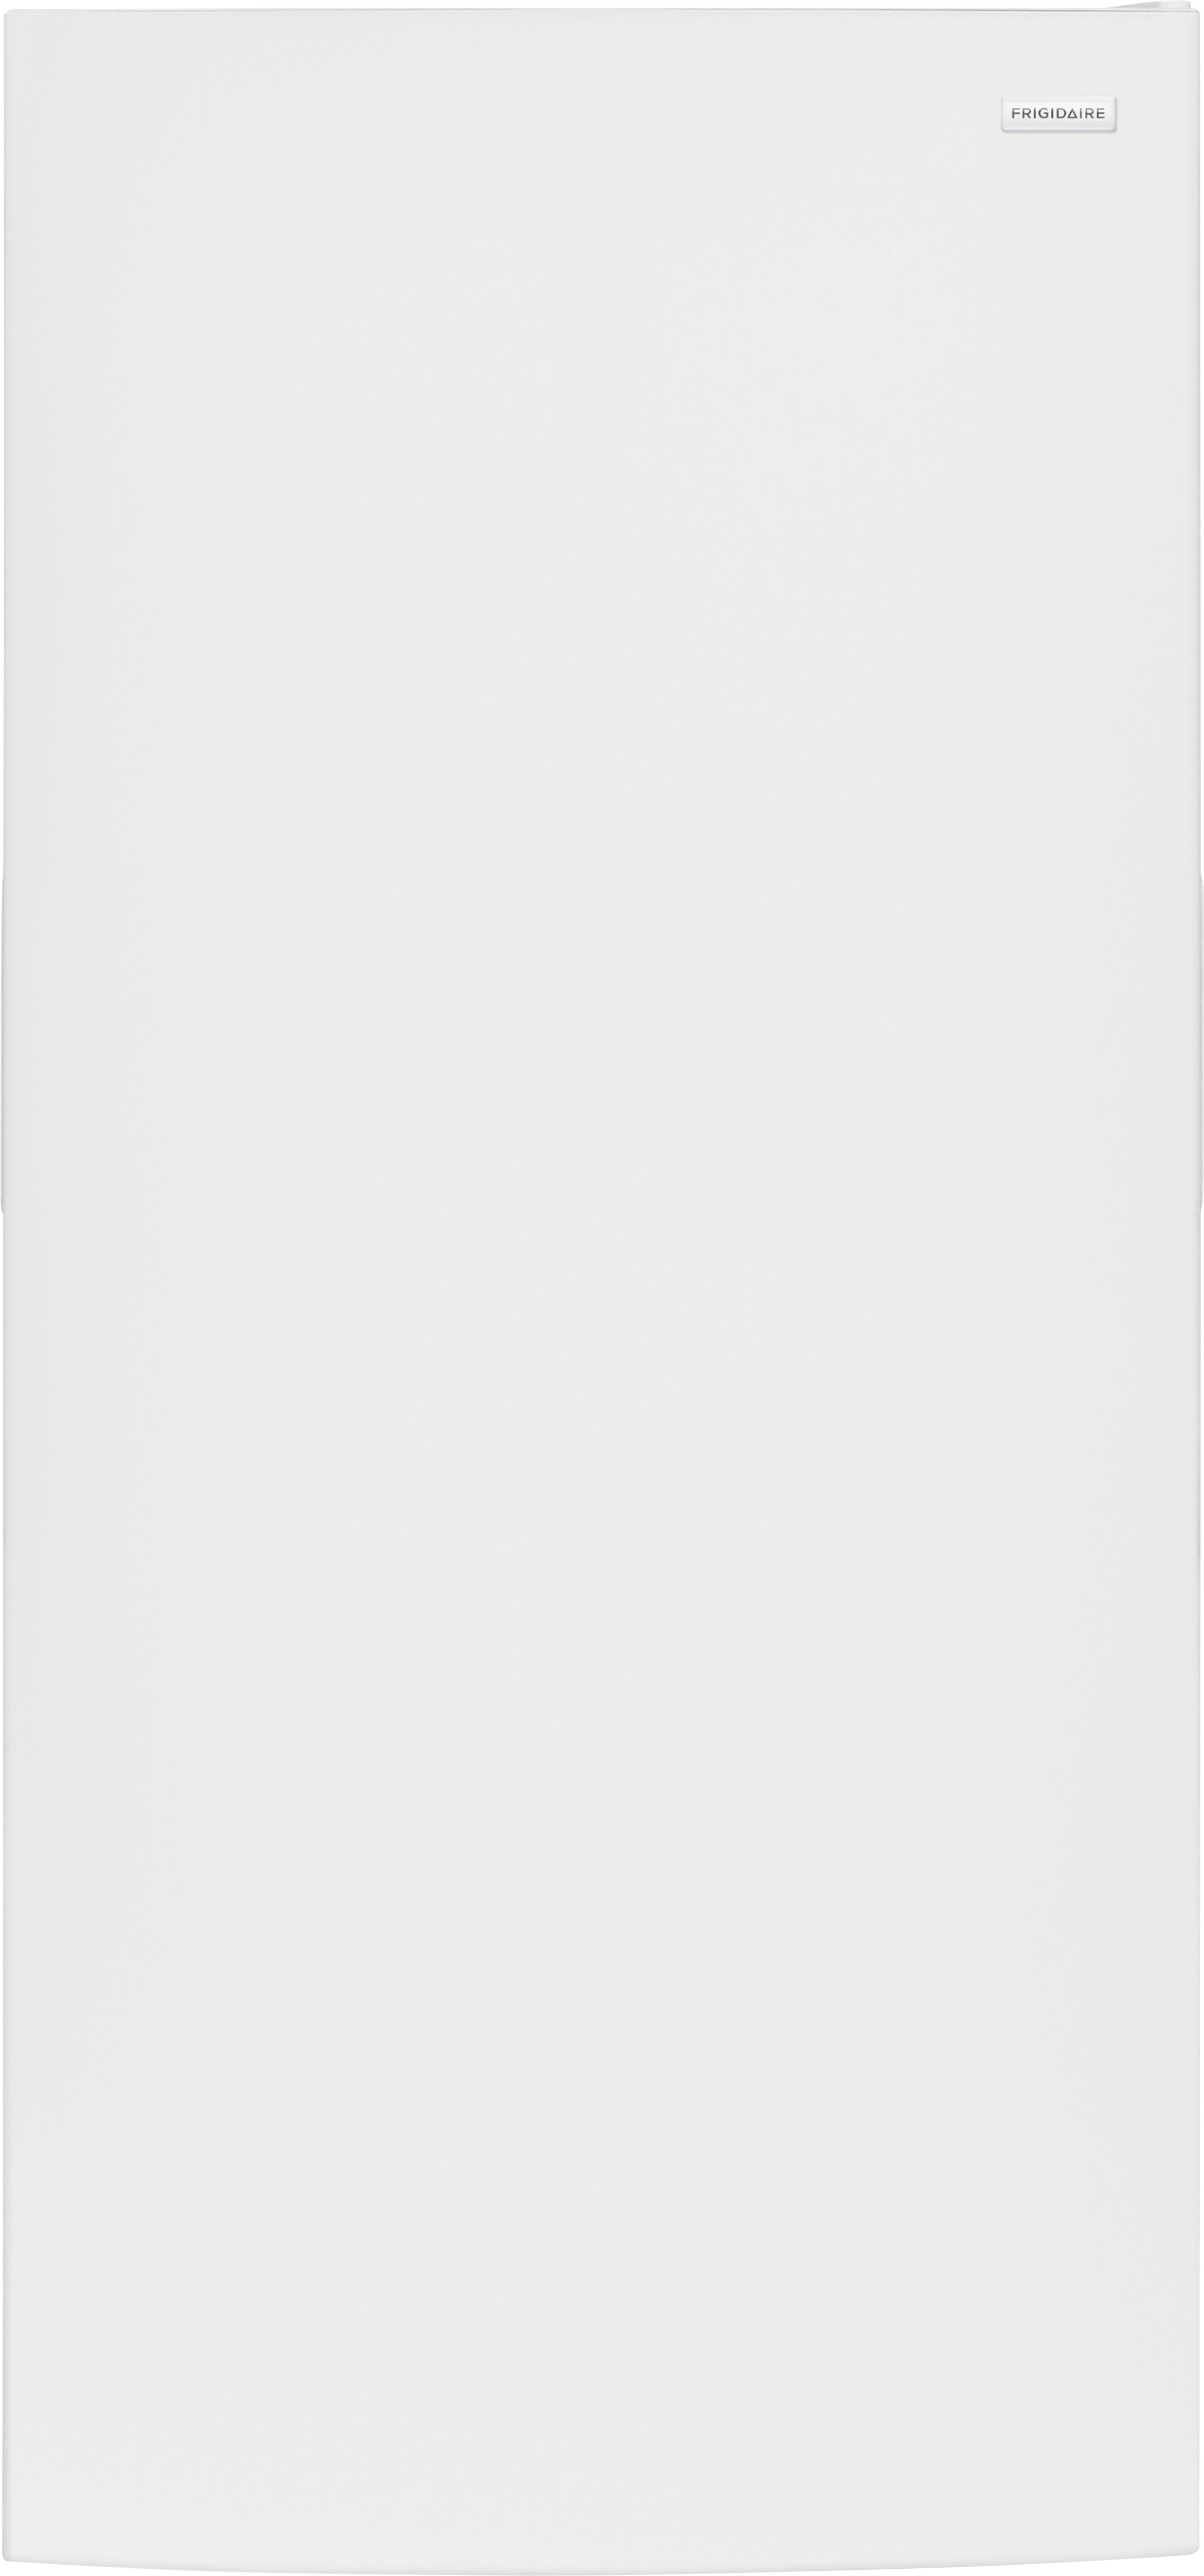 Best Buy: Insignia™ 3.5 Cu. Ft. Chest Freezer White NS-CZ35WH7